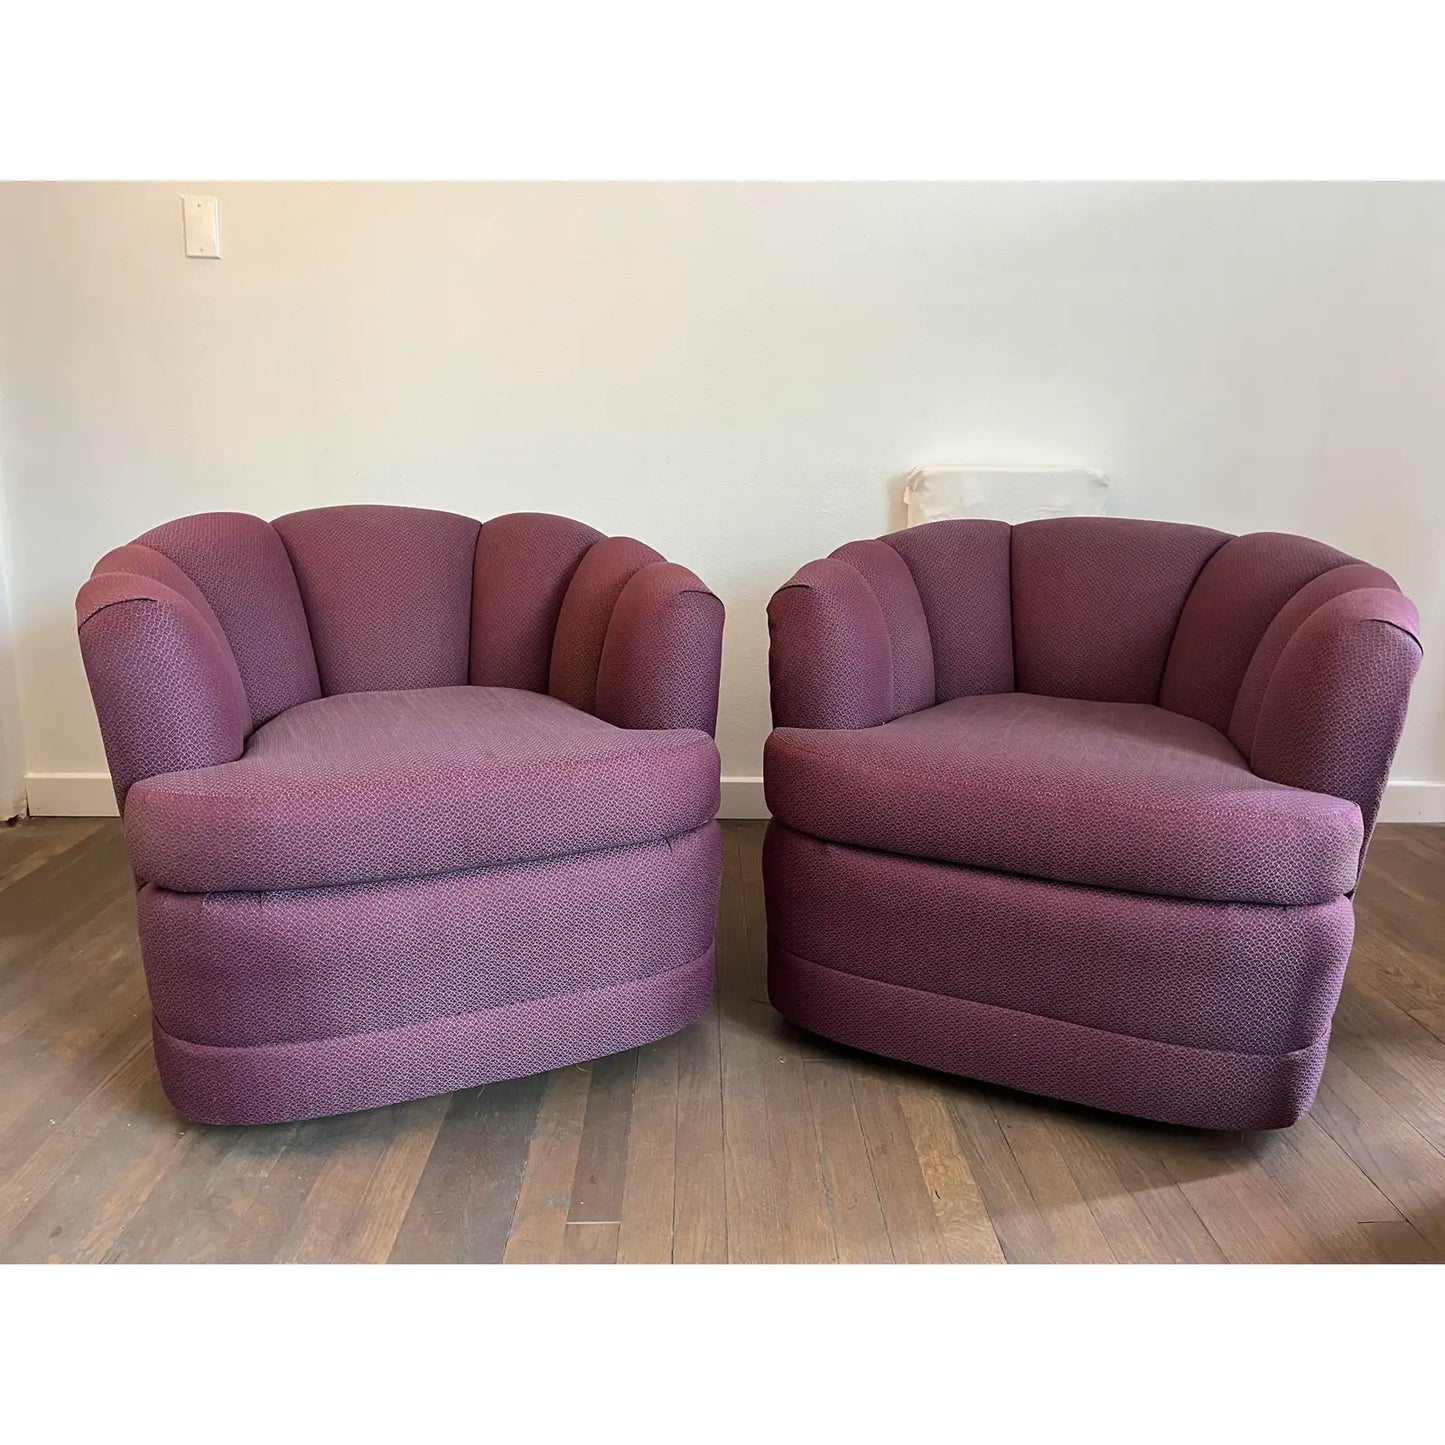 1989 Vintage Purple Barrel Scalloped Back Swivel Club Chairs - a Pair